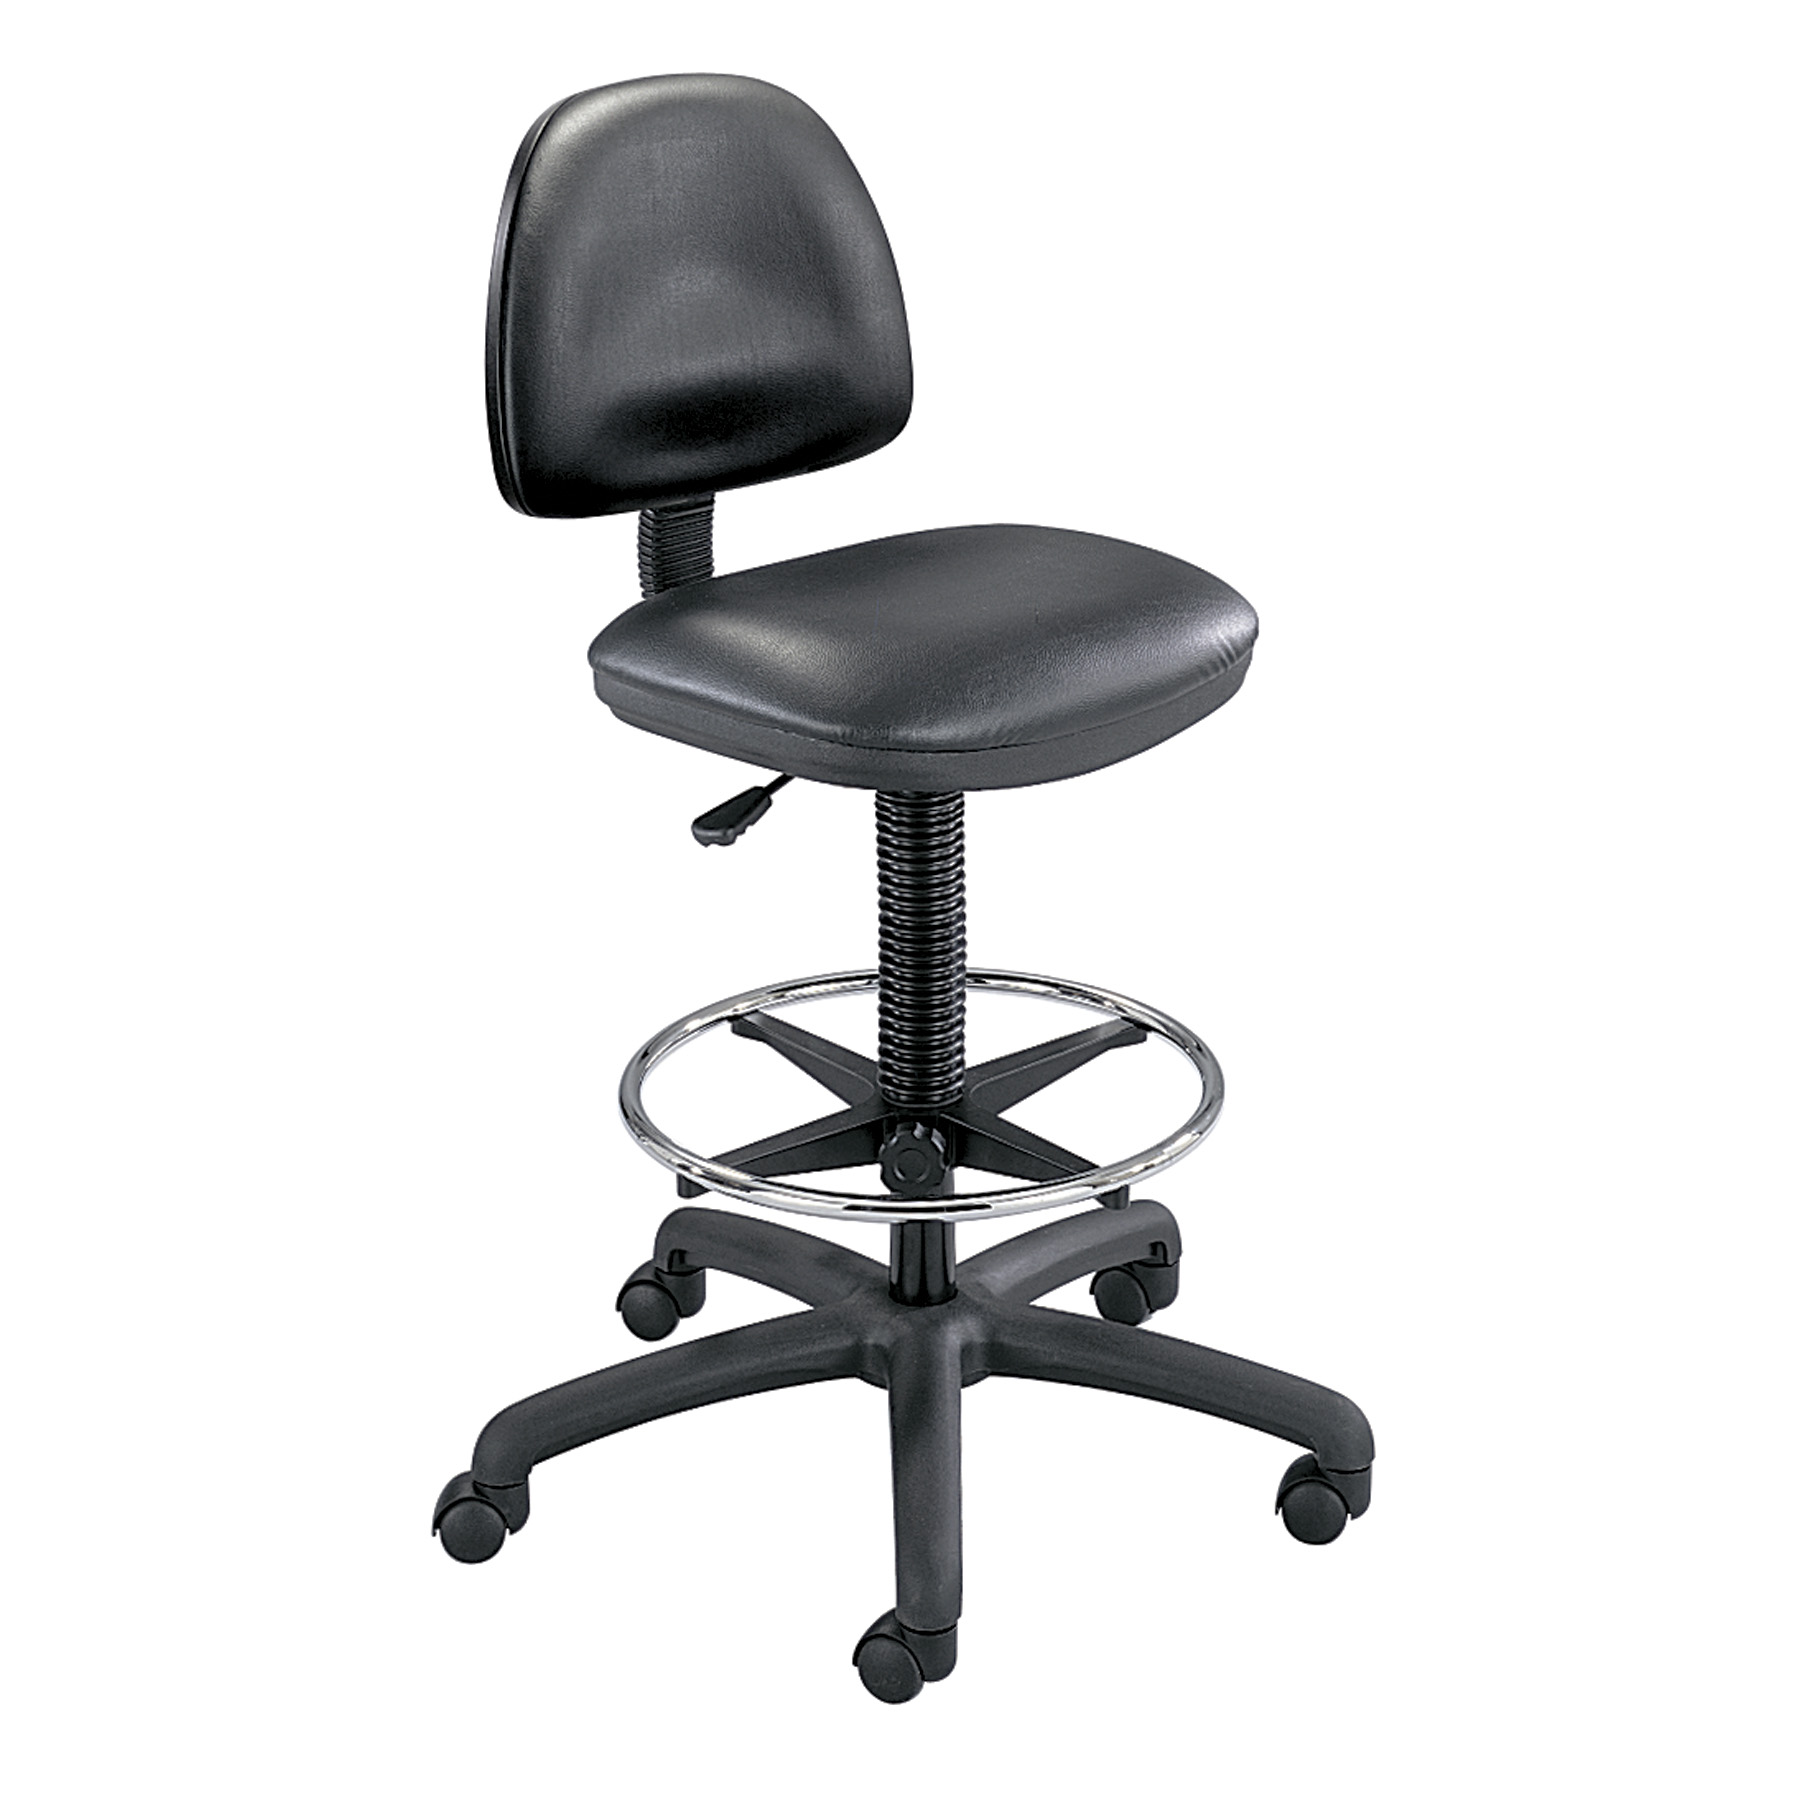 Safco Precision Vinyl ExtendedHeight Chair with Footring